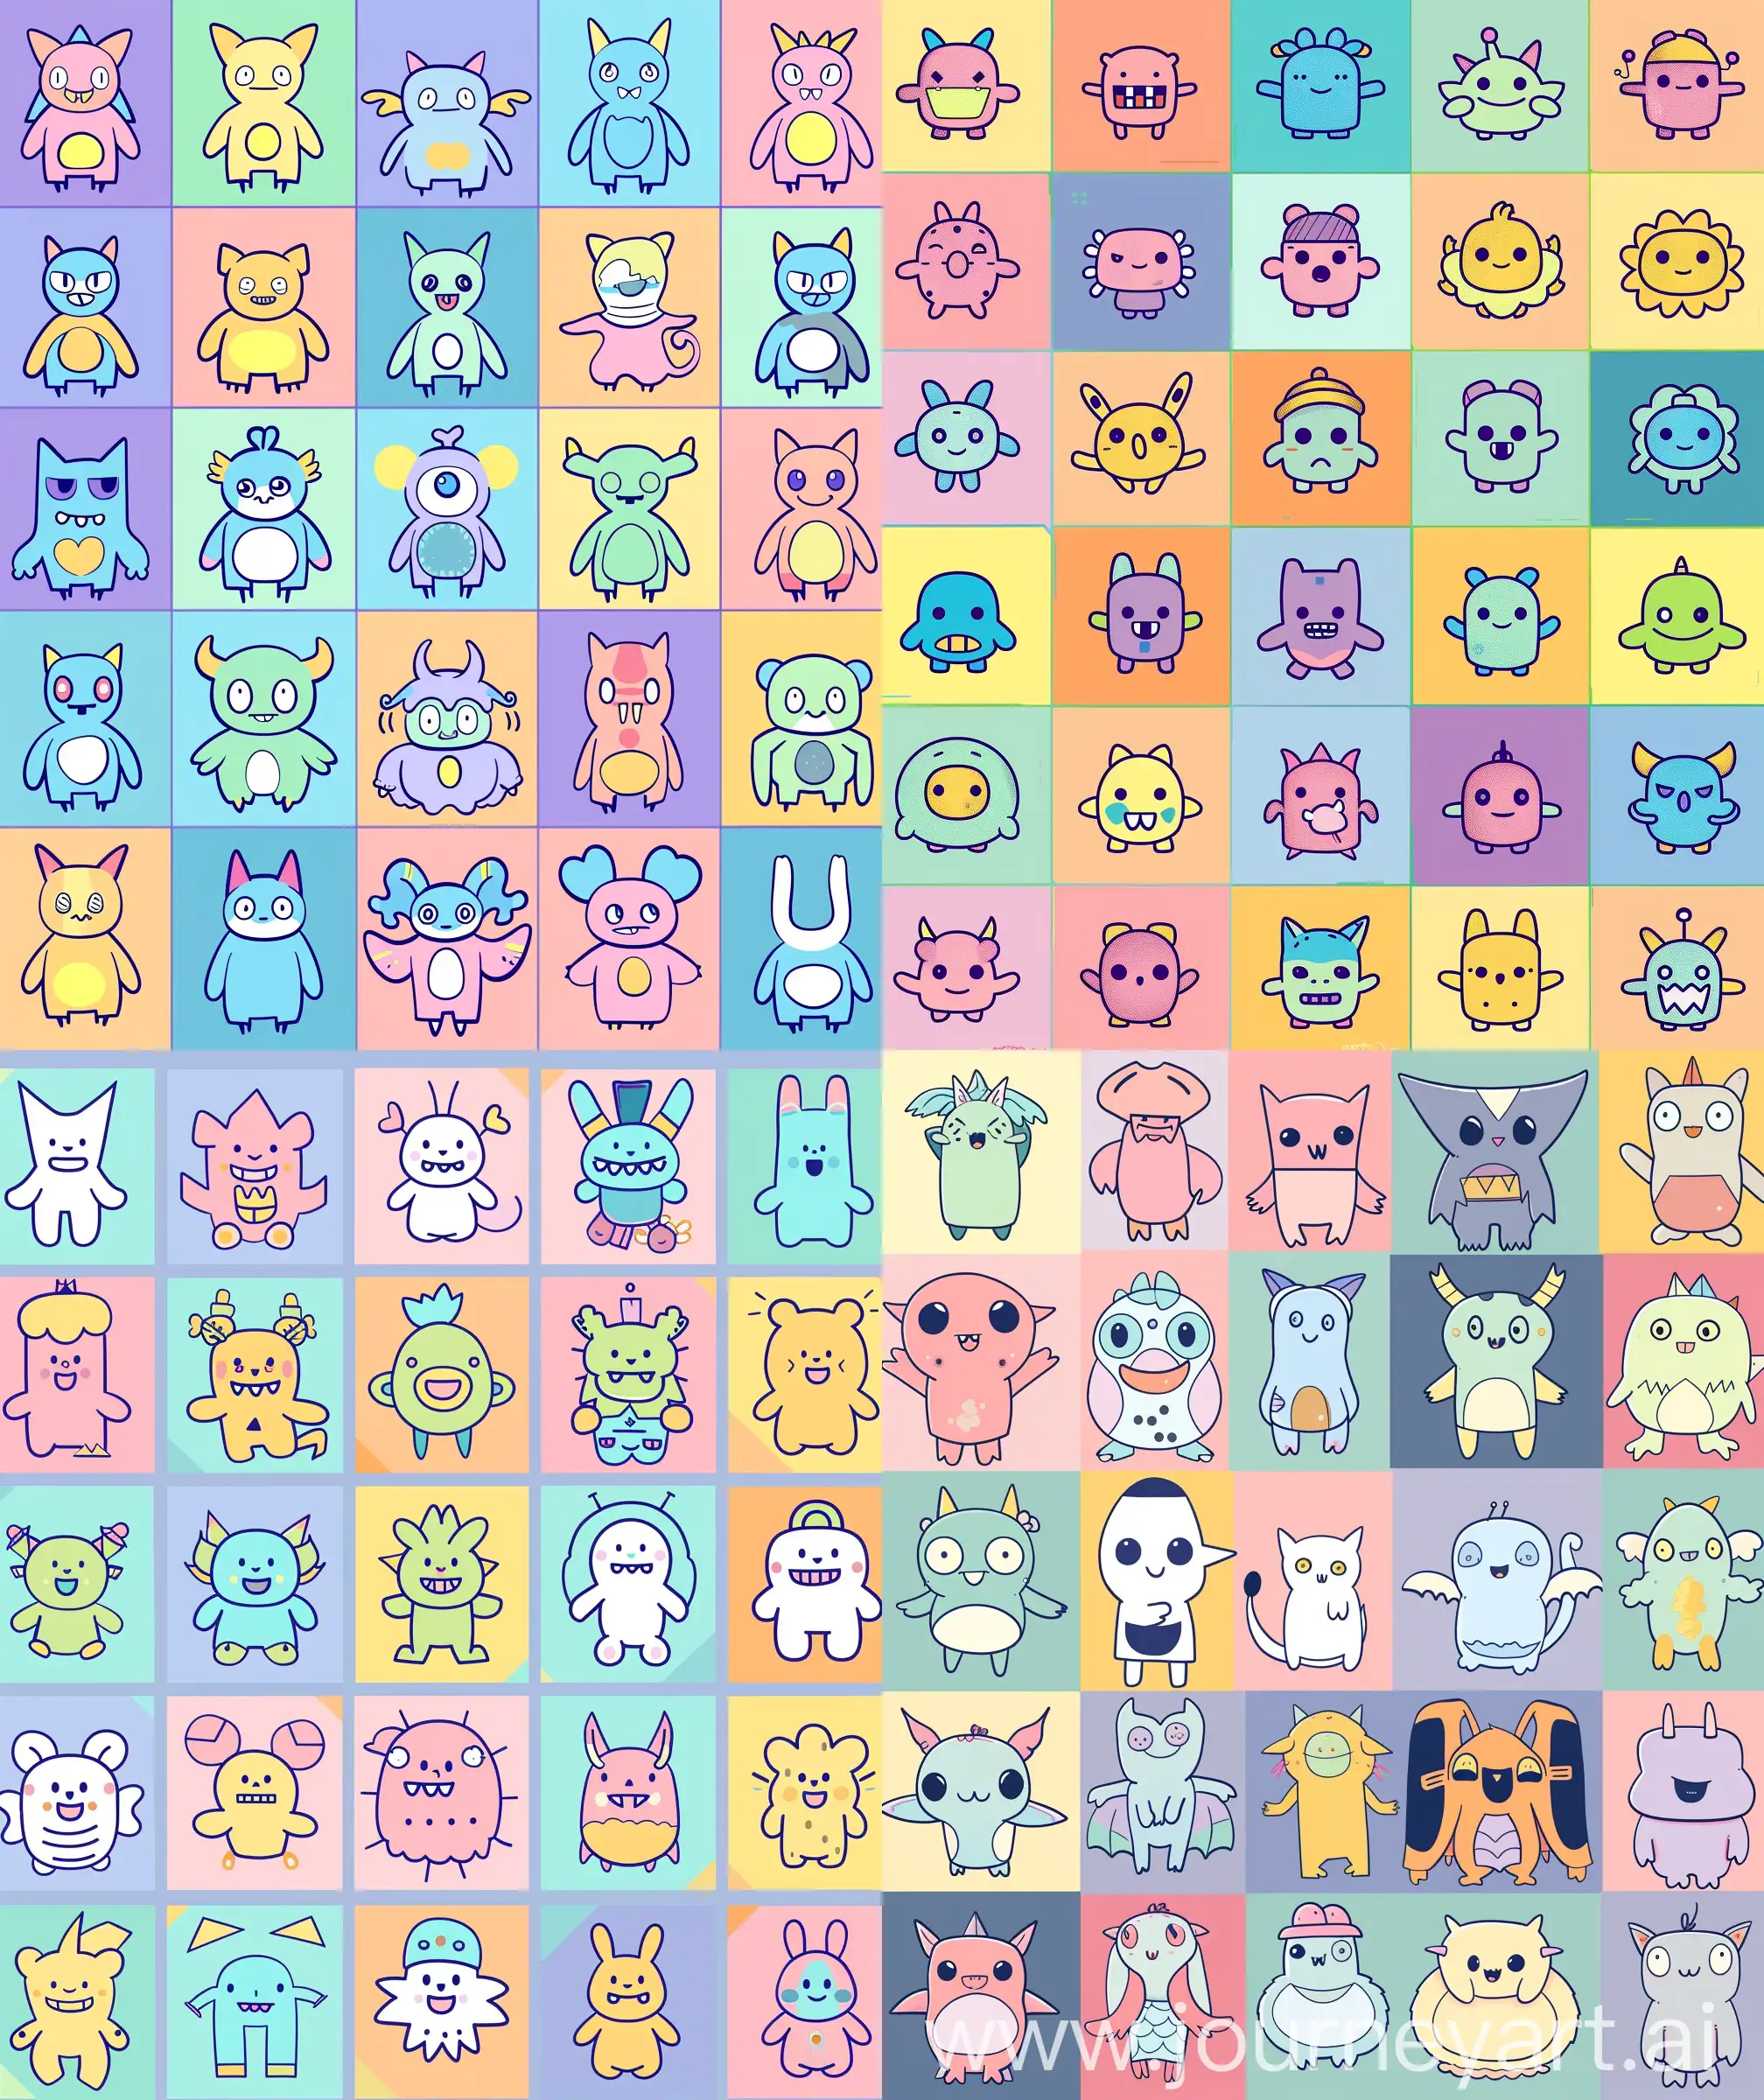 A grid of colorful cartoon characters in the style of [Moebius] with 20 square arranged side by side with one character per box, simple line drawings with a flat design and pastel colors. The characters are cute and funny with simple designs made of simple lines. Colorful cartoon characters include cute little monsters with whimsical and happy vibes. A colorful background uses simple shapes with bold outlines for the simple line art designs and outlines. --ar 27:32